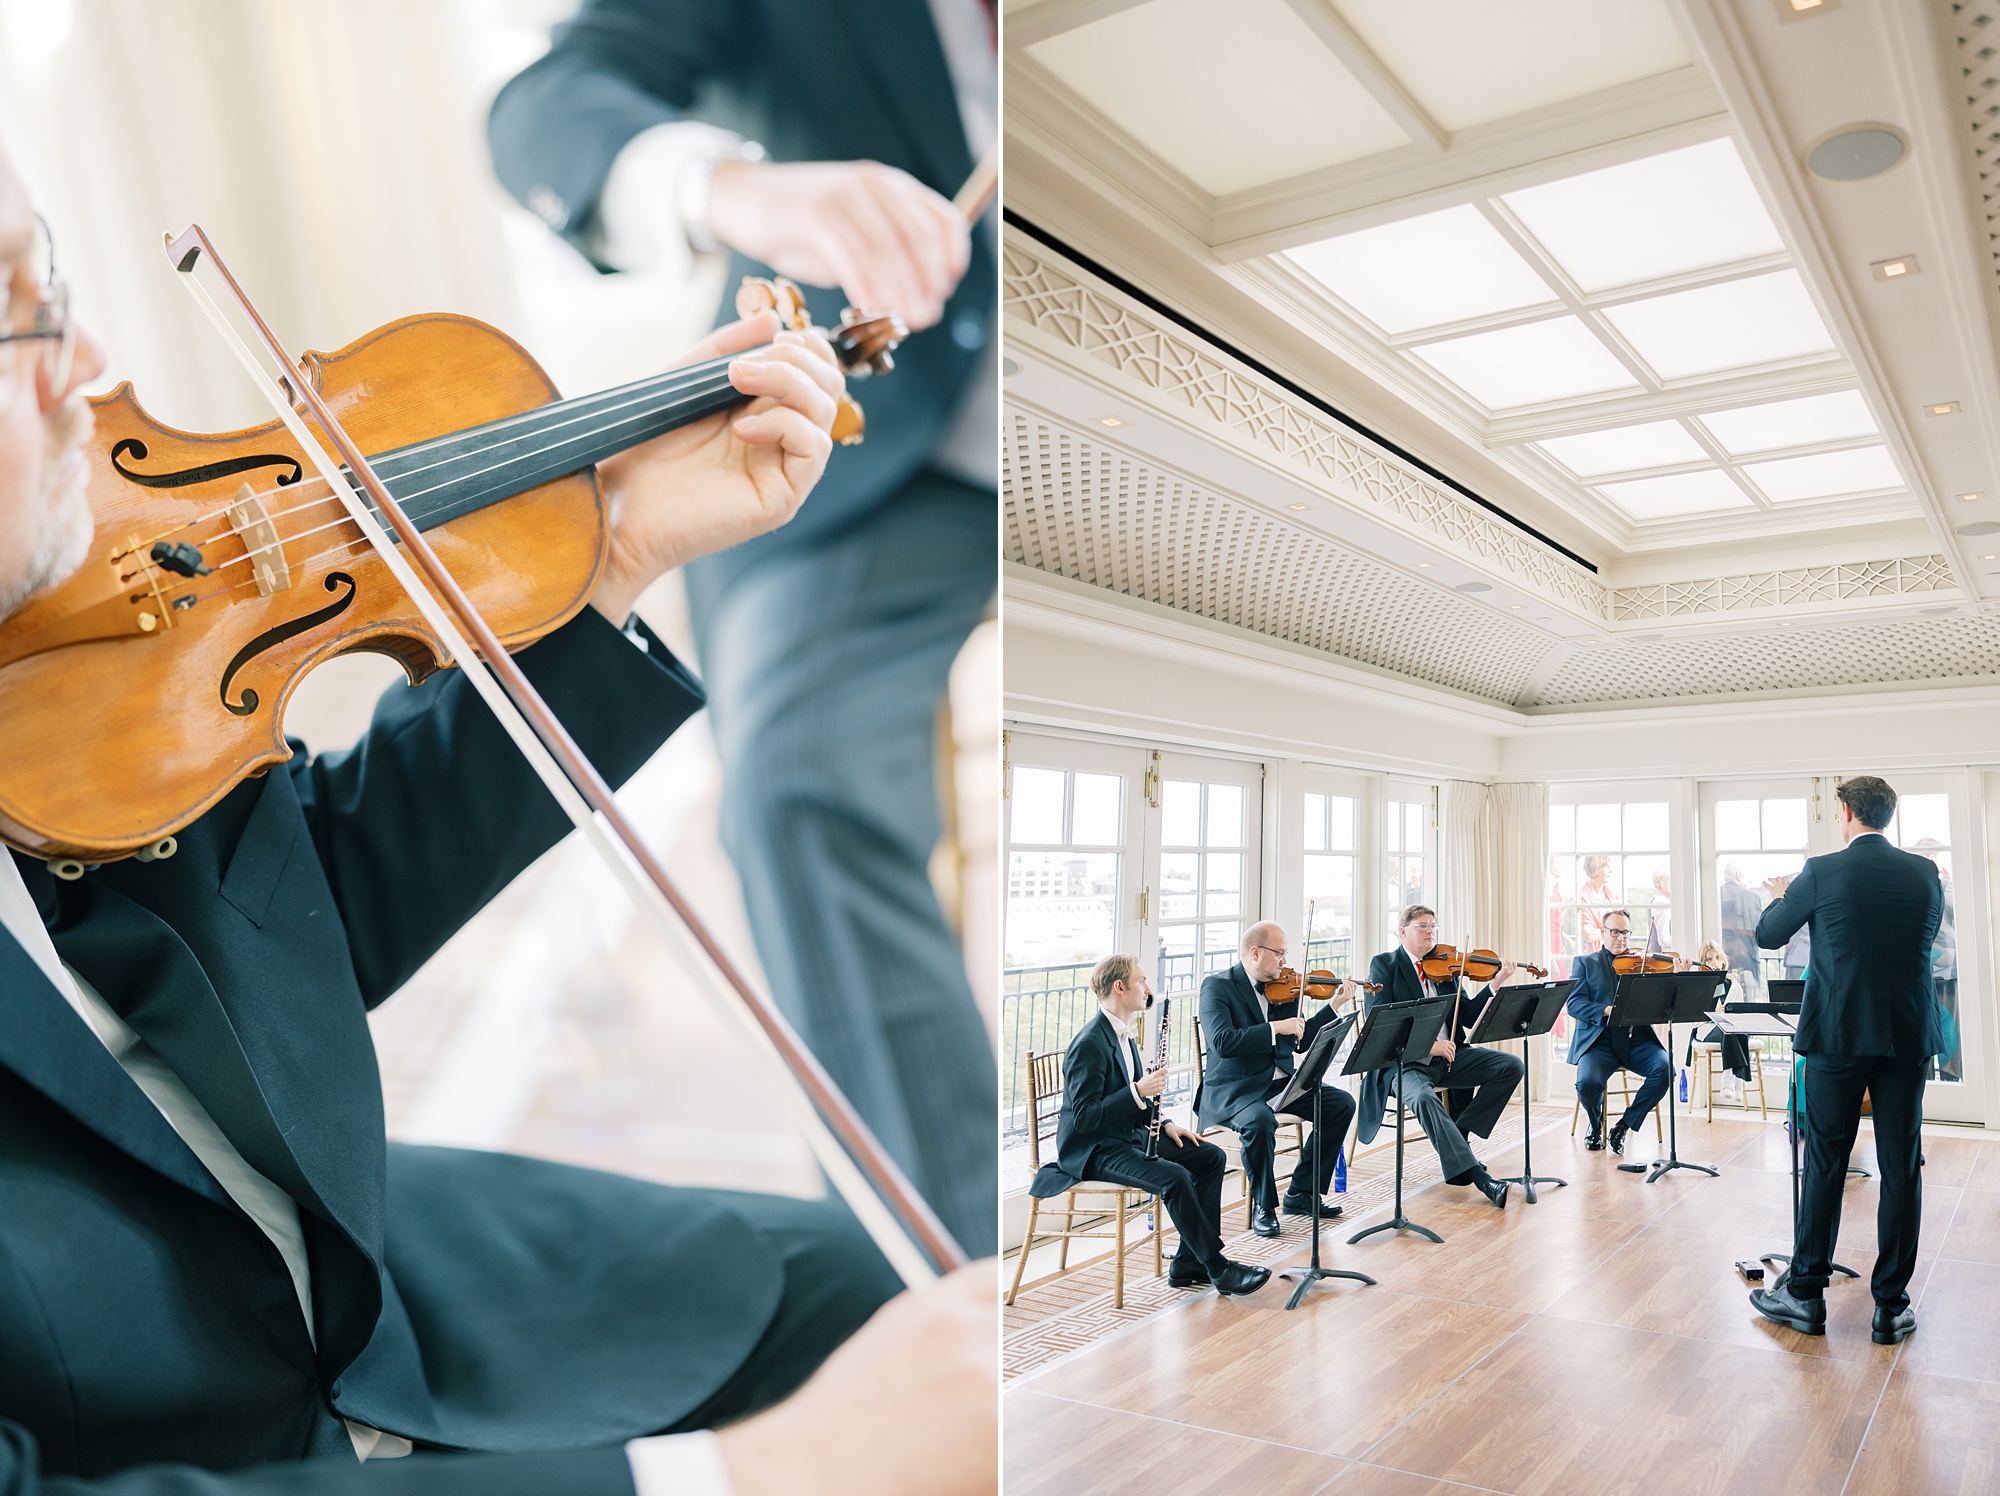 string quartet plays for wedding ceremony at the Hay Adams Hotel